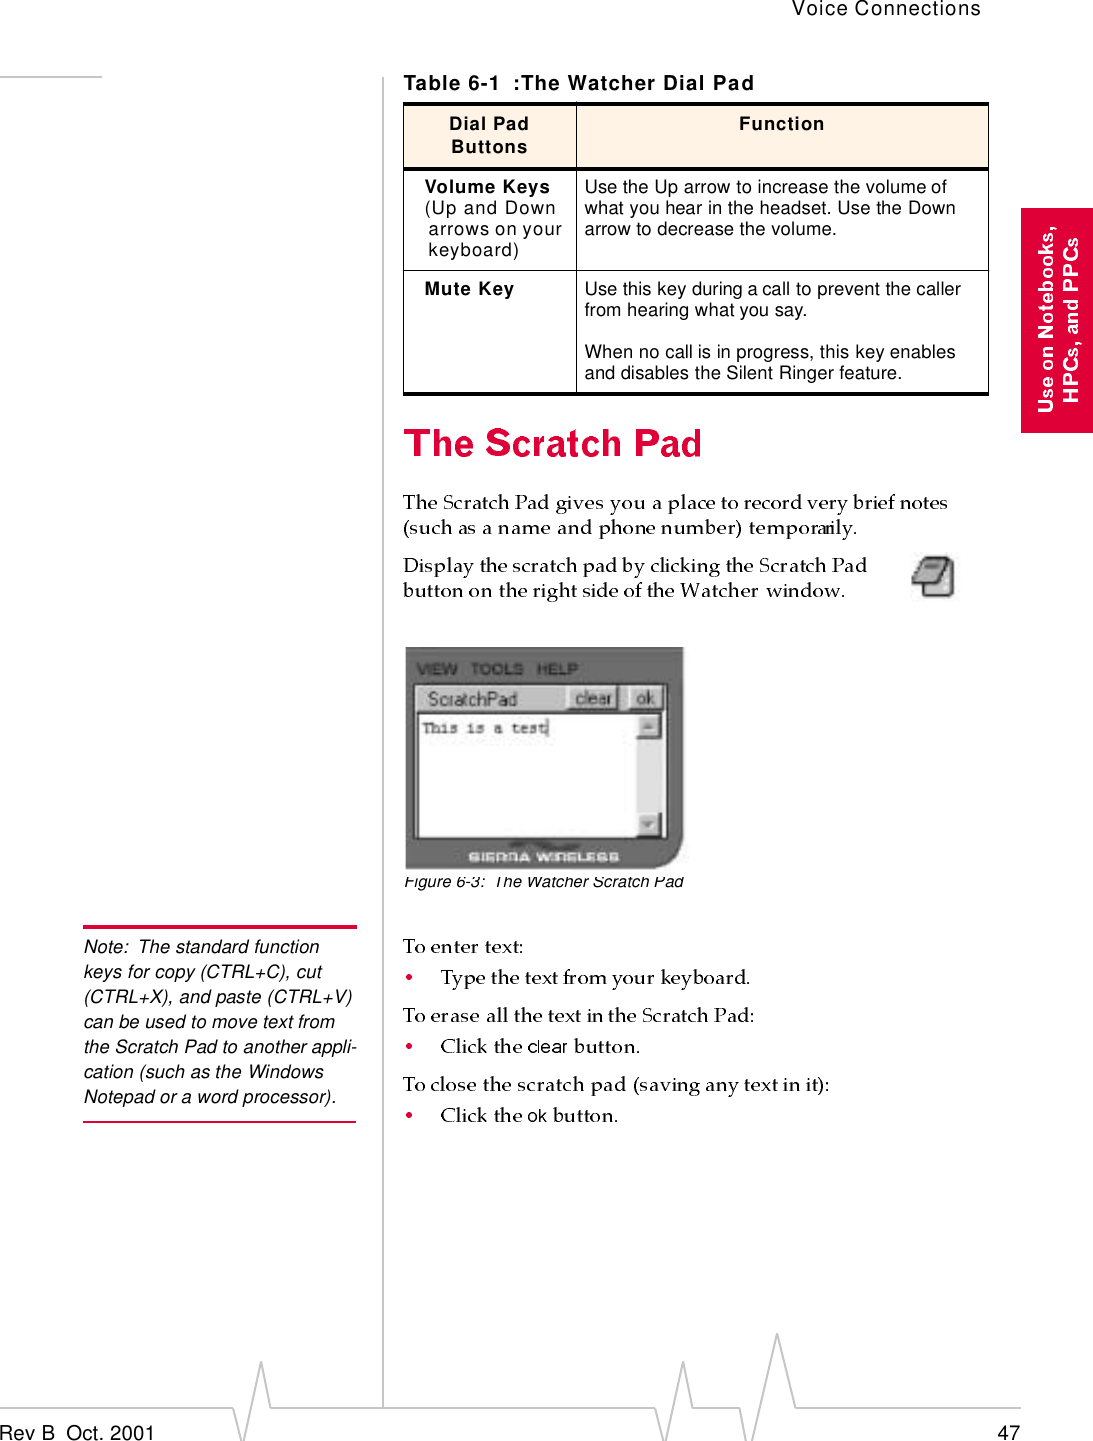 Voice ConnectionsRev B  Oct. 2001 47Figure 6-3: The Watcher Scratch PadNote: The standard function keys for copy (CTRL+C), cut (CTRL+X), and paste (CTRL+V) can be used to move text from the Scratch Pad to another appli-cation (such as the Windows Notepad or a word processor).Volume Keys(Up and Down arrows on your keyboard)Use the Up arrow to increase the volume of what you hear in the headset. Use the Down arrow to decrease the volume.Mute Key Use this key during a call to prevent the caller from hearing what you say.When no call is in progress, this key enables and disables the Silent Ringer feature.Table 6-1 :The Watcher Dial PadDial Pad Buttons Function